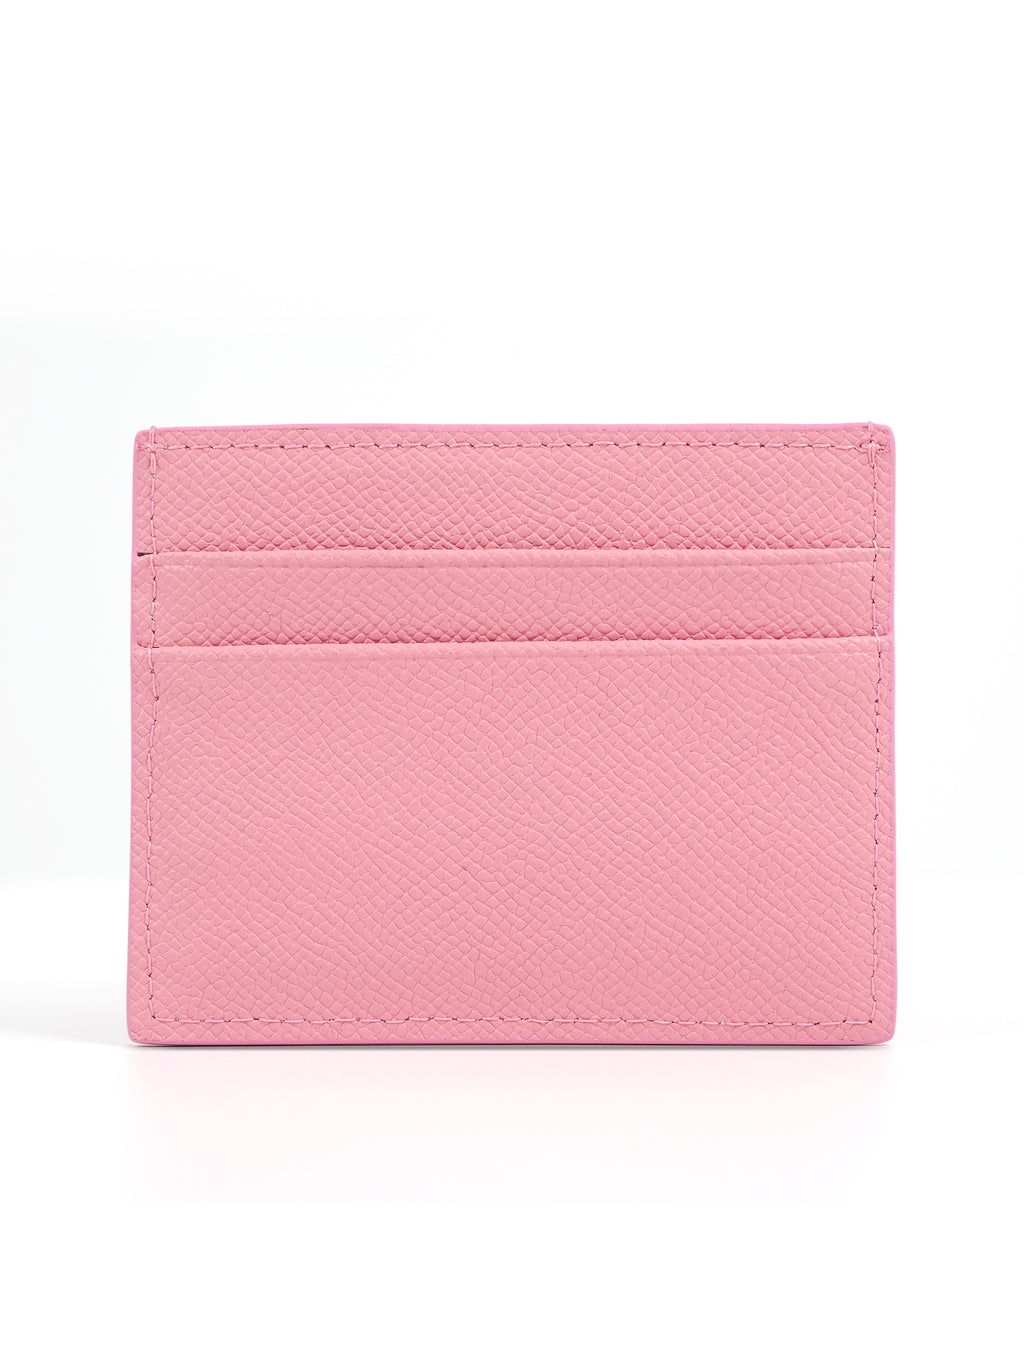 THE BLOSSOM LEATHER CARDHOLDER